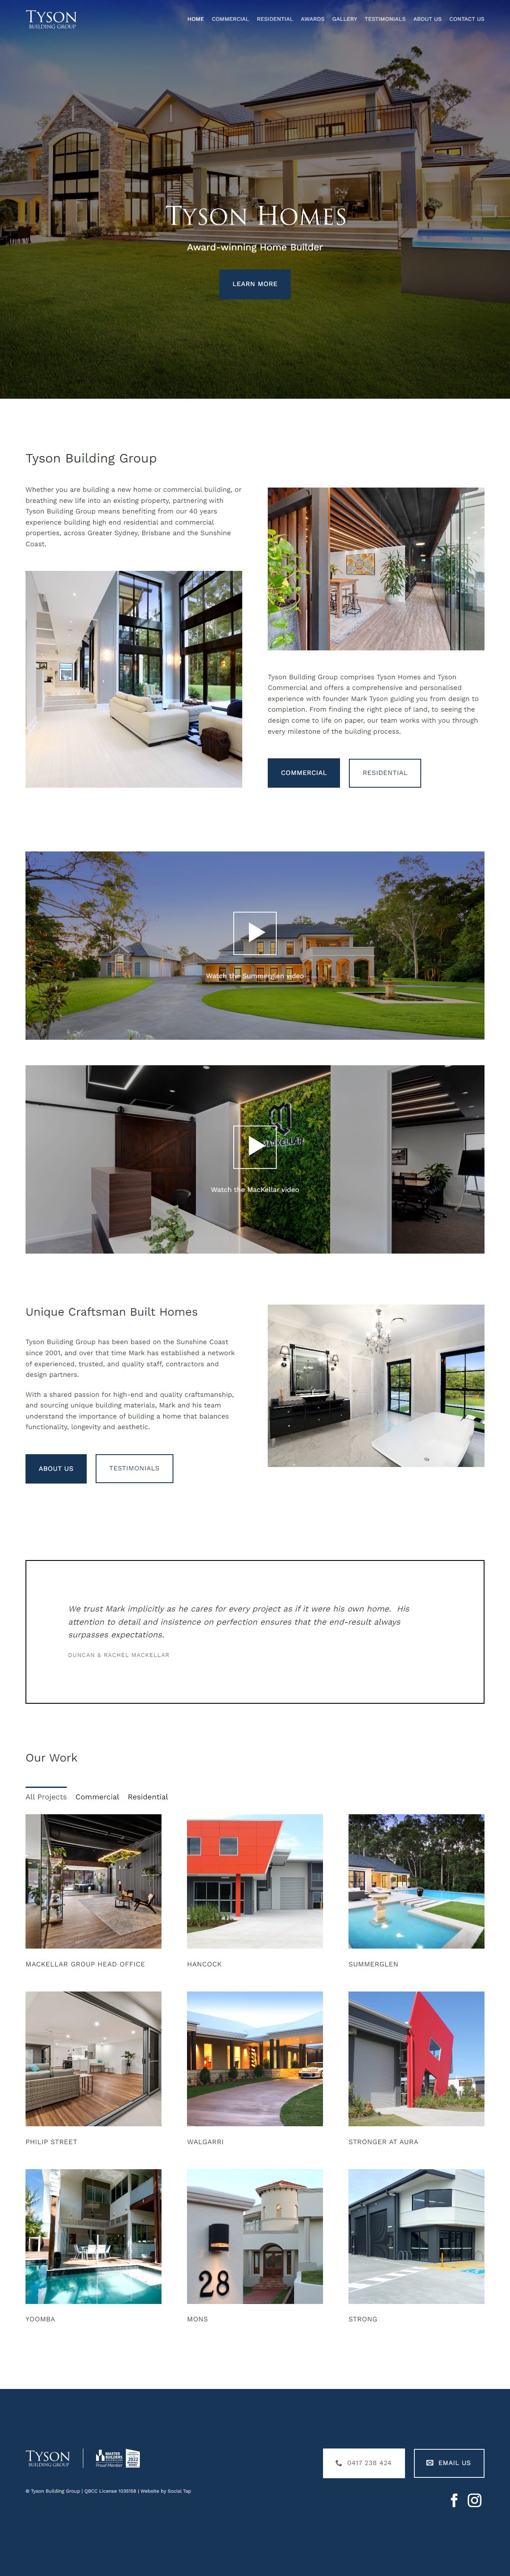 Hospitality Tourism Website Design Tyson Homes And Commercial